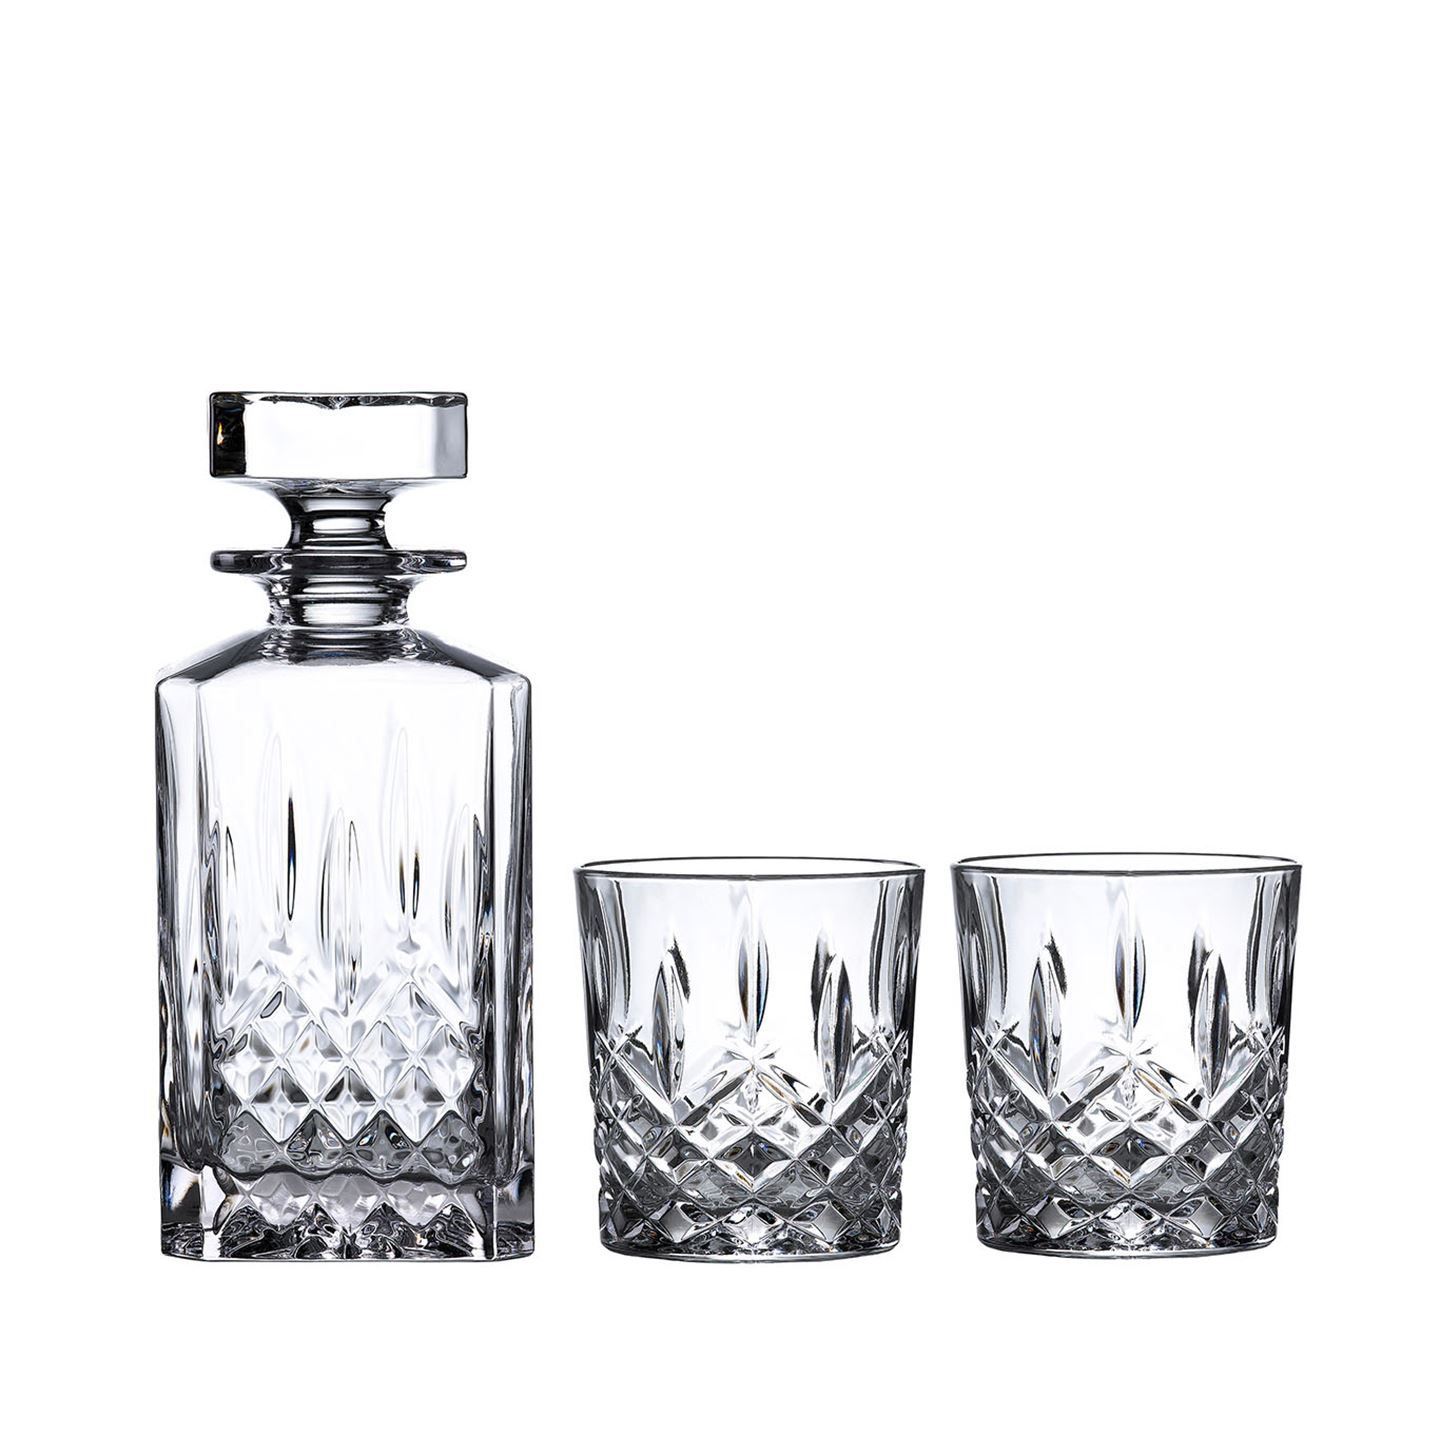 Marquis Markham 11oz Double Old Fashioned, Pair & Square Decanter | Waterford | Waterford